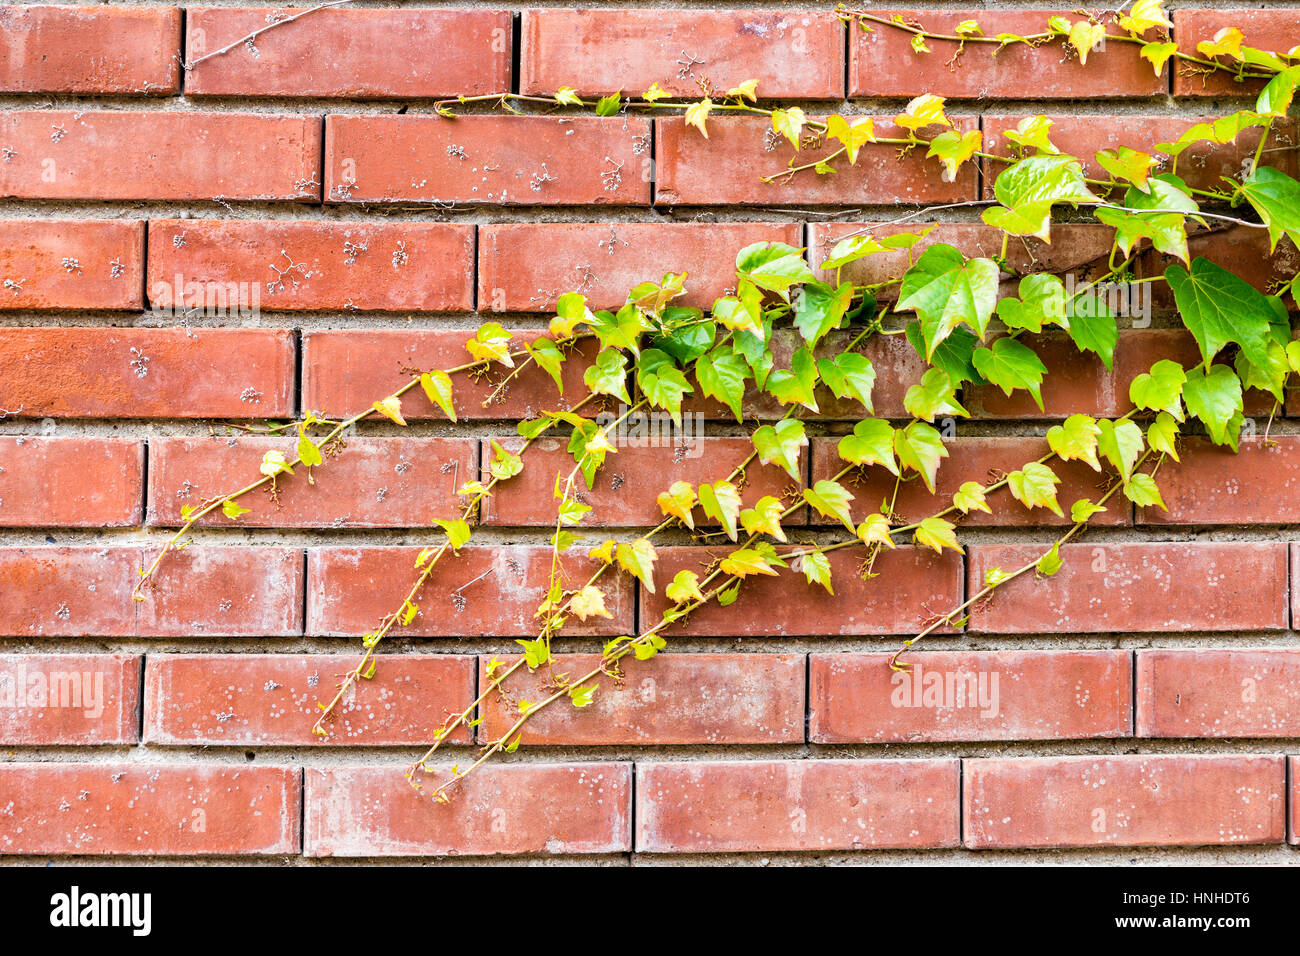 Green ivy on brick wall background Stock Photo